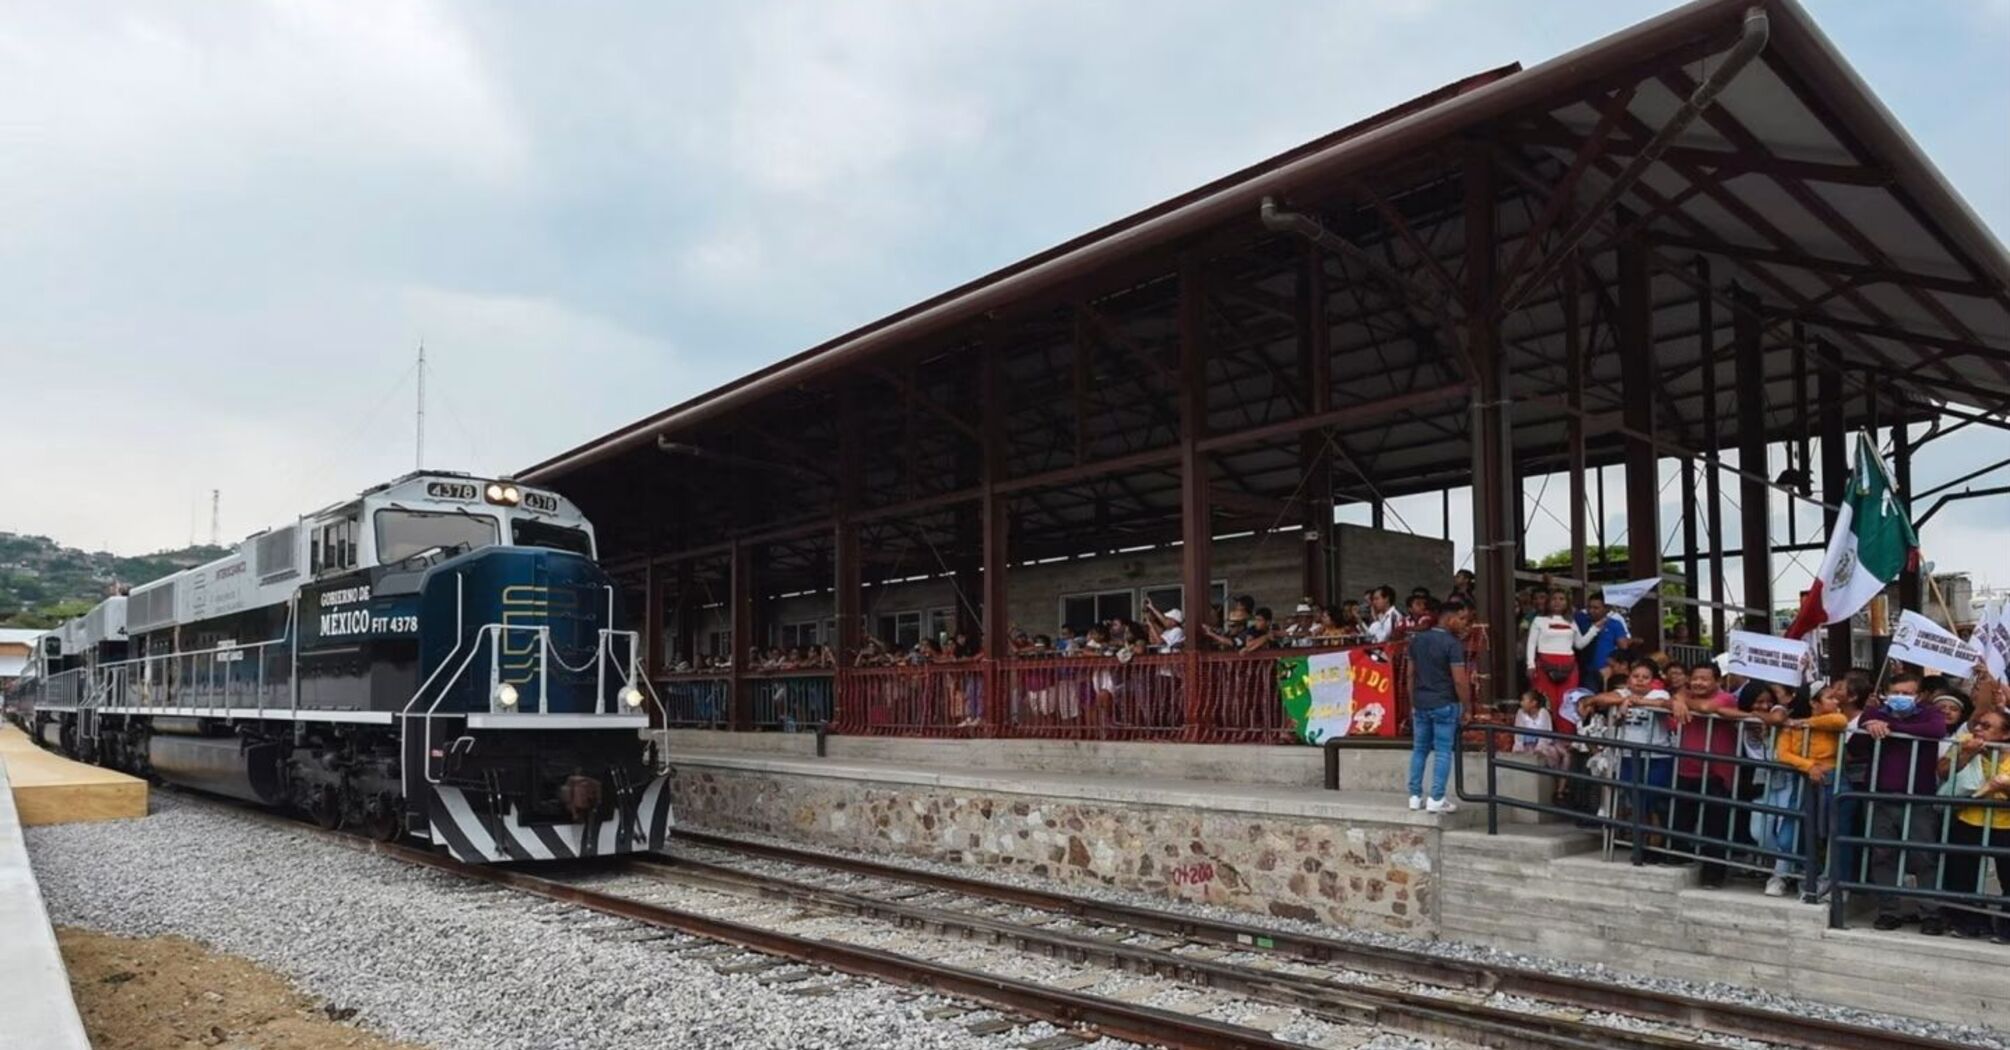 A 188-mile inter-oceanic route: what will surprise you about Mexico's new passenger train